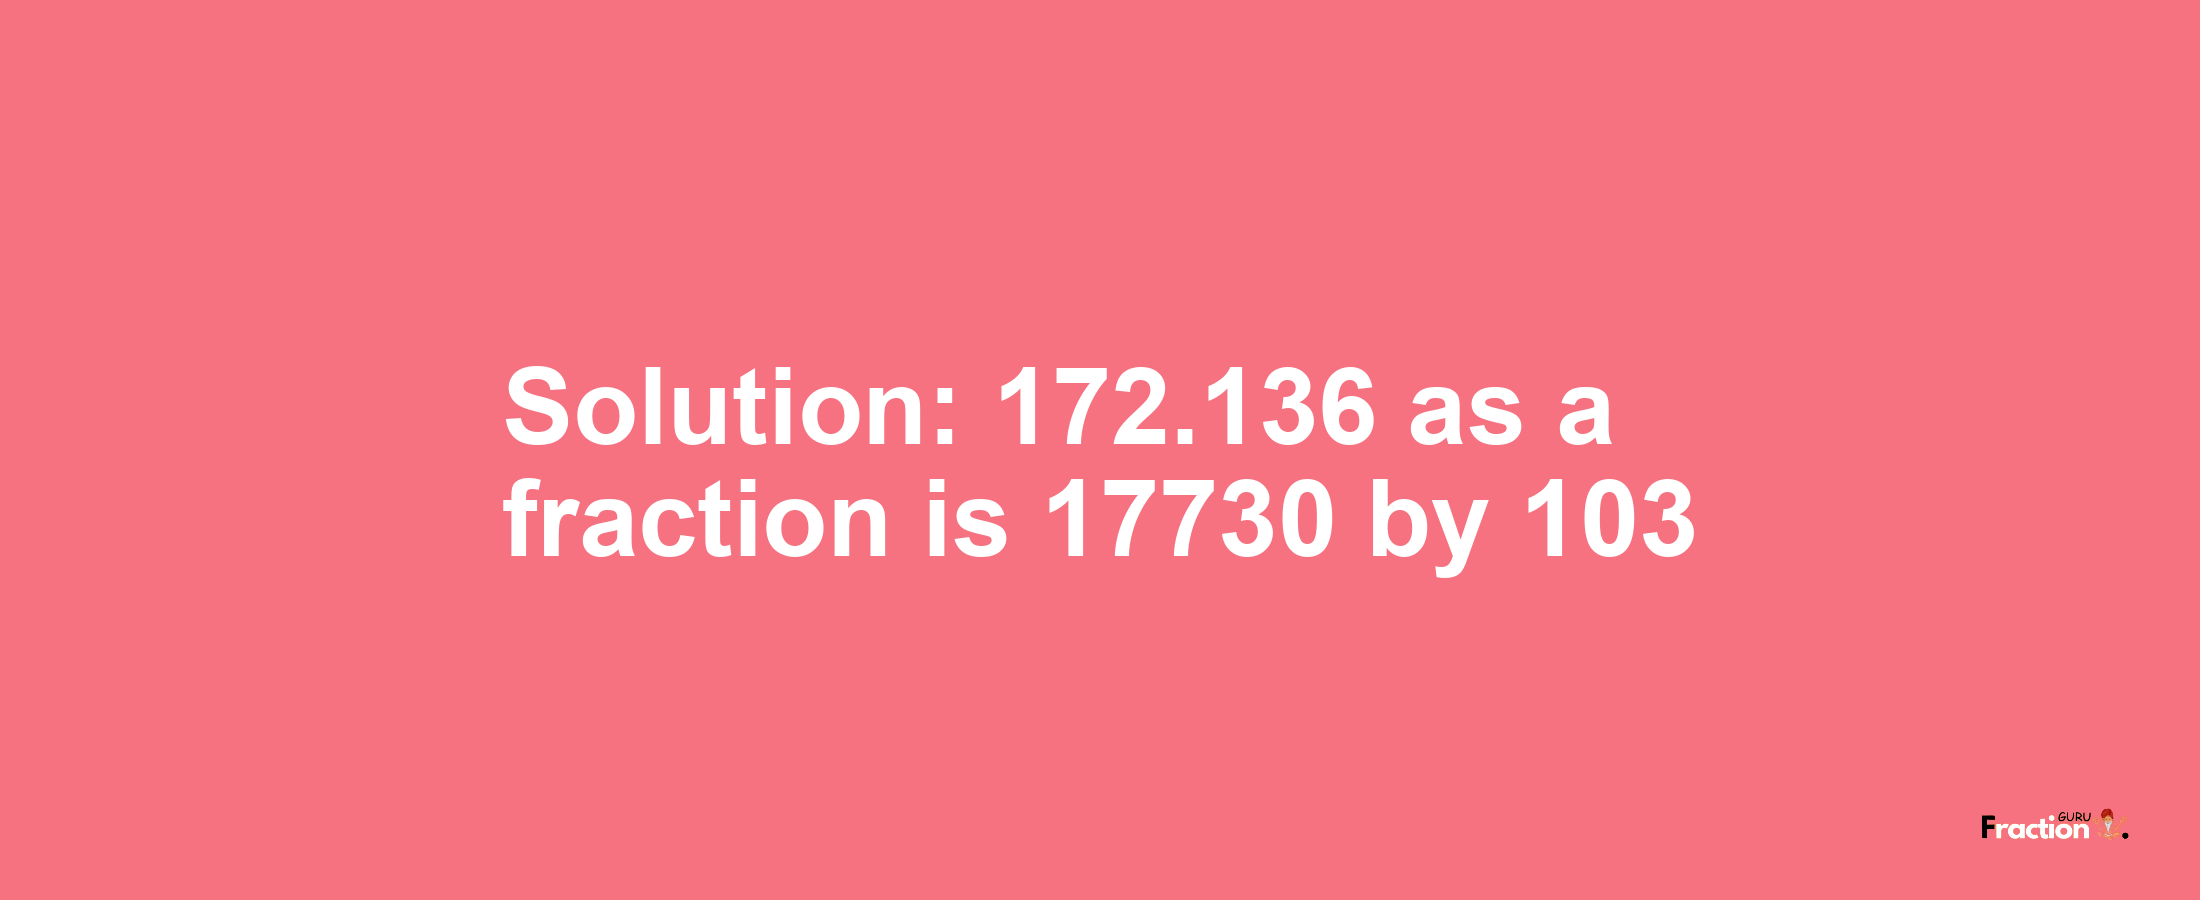 Solution:172.136 as a fraction is 17730/103